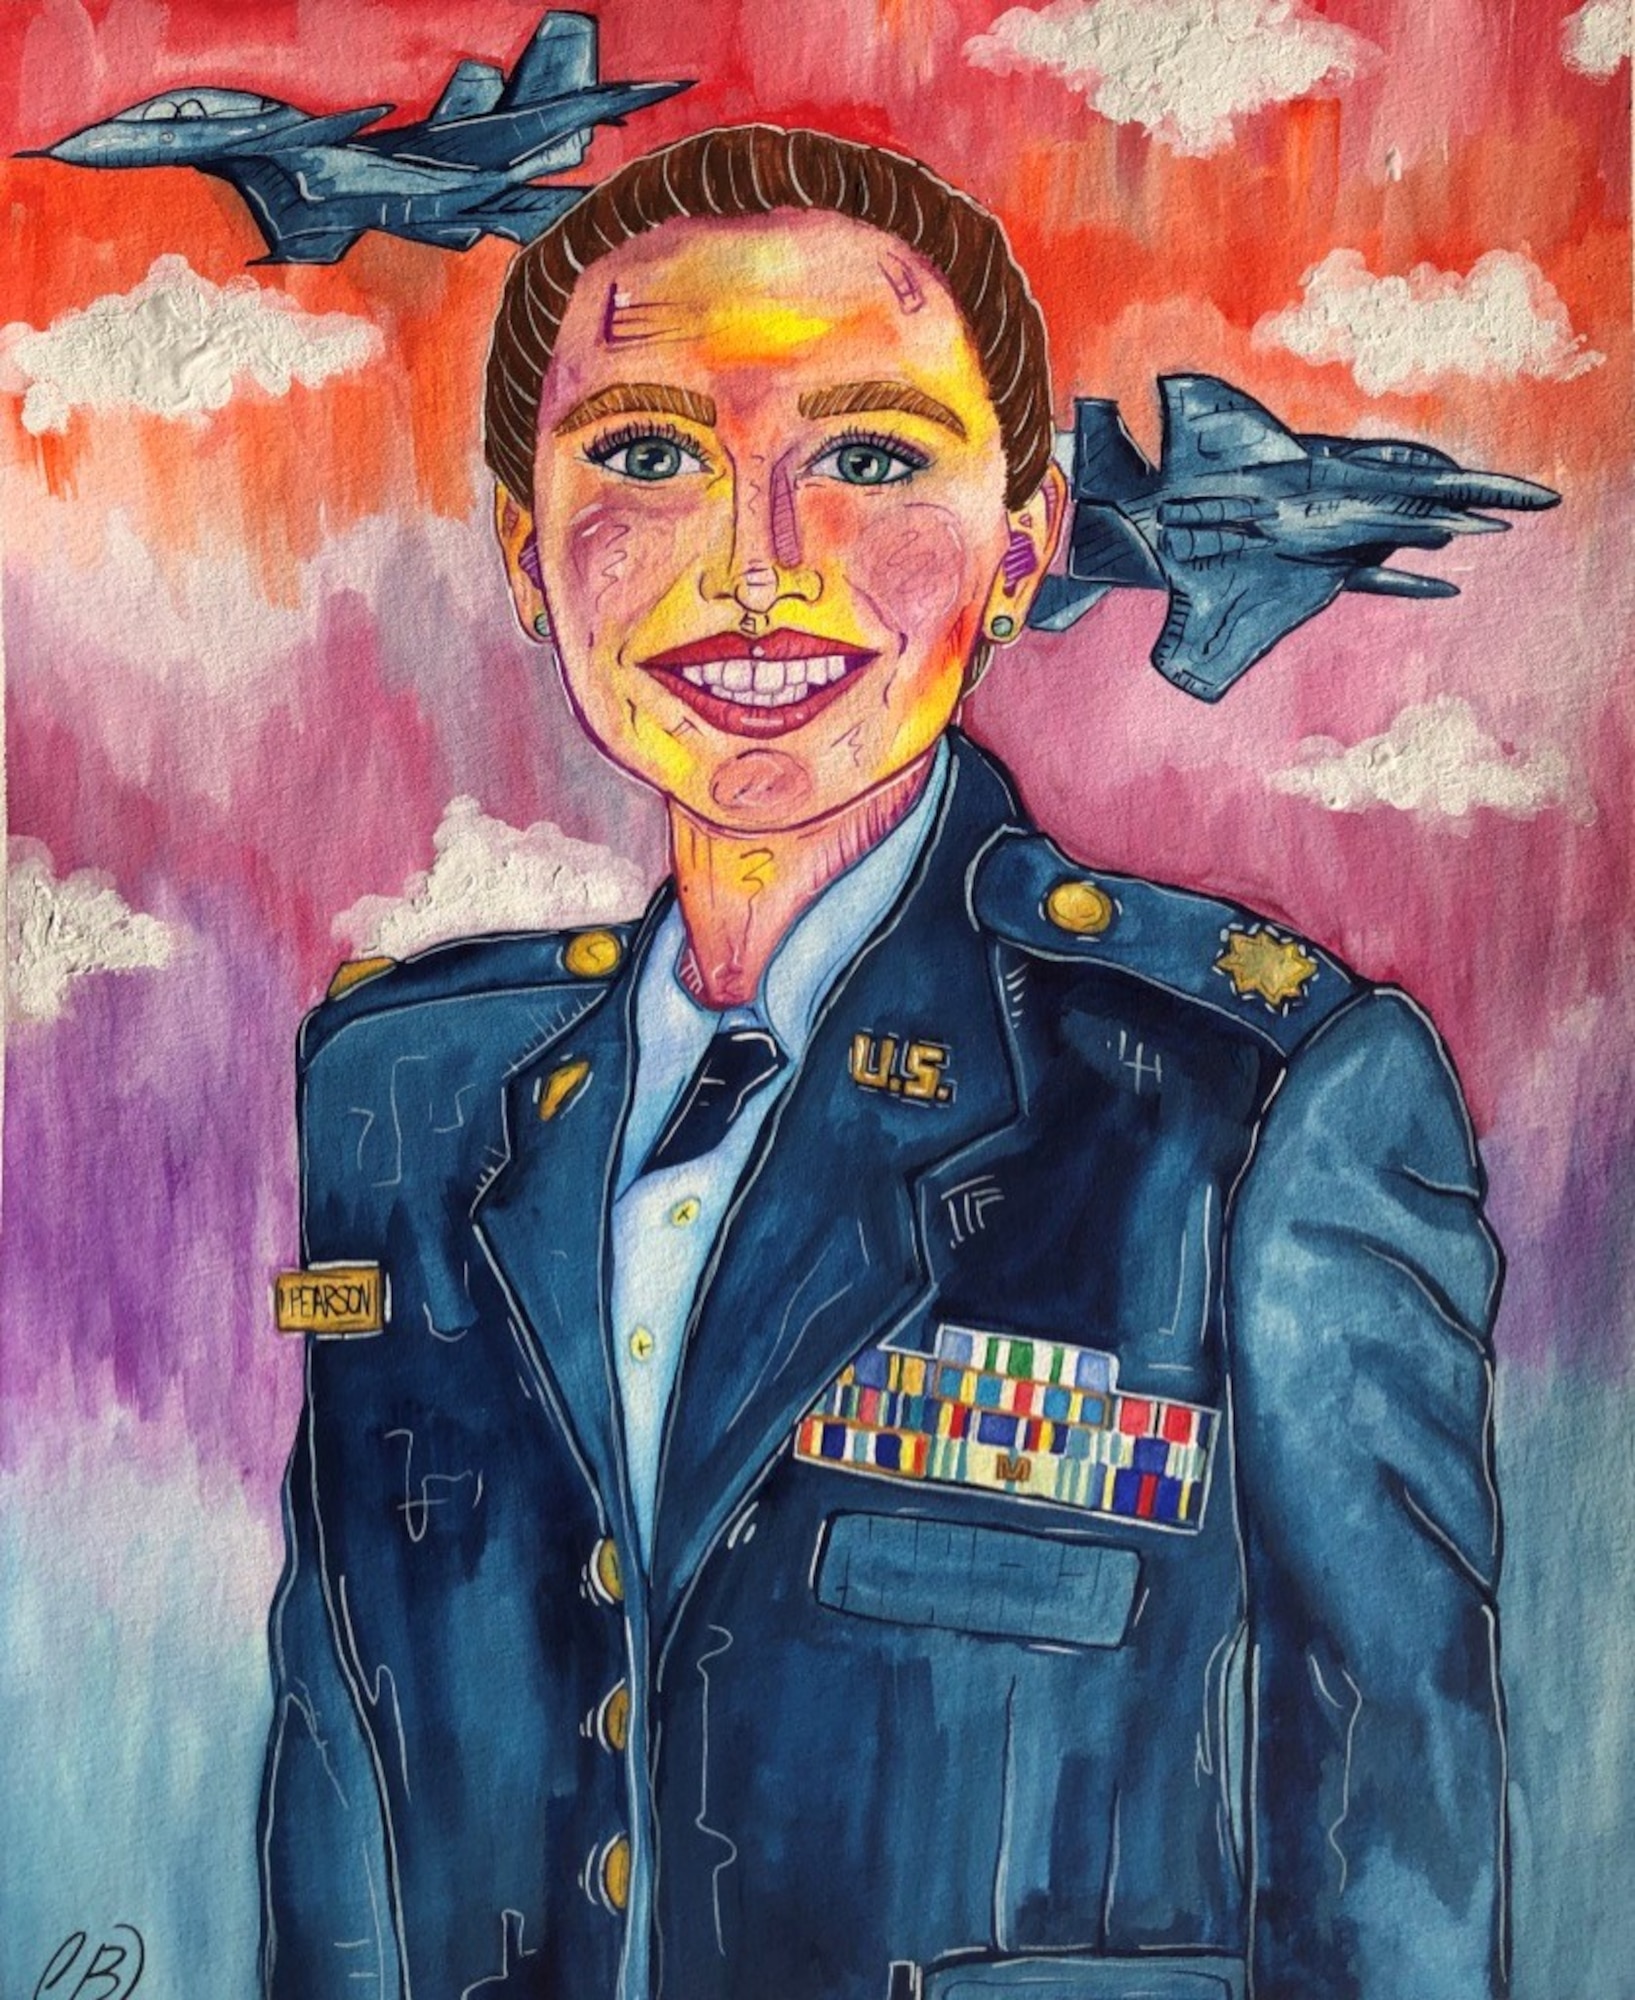 Manatee School for the Arts senior Caroline Beattie painted a portrait of her Economics and Government teacher who serves in the Air Force Reserves for the school's Veteran's Day program. (U.S. Air Force courtesy photo)